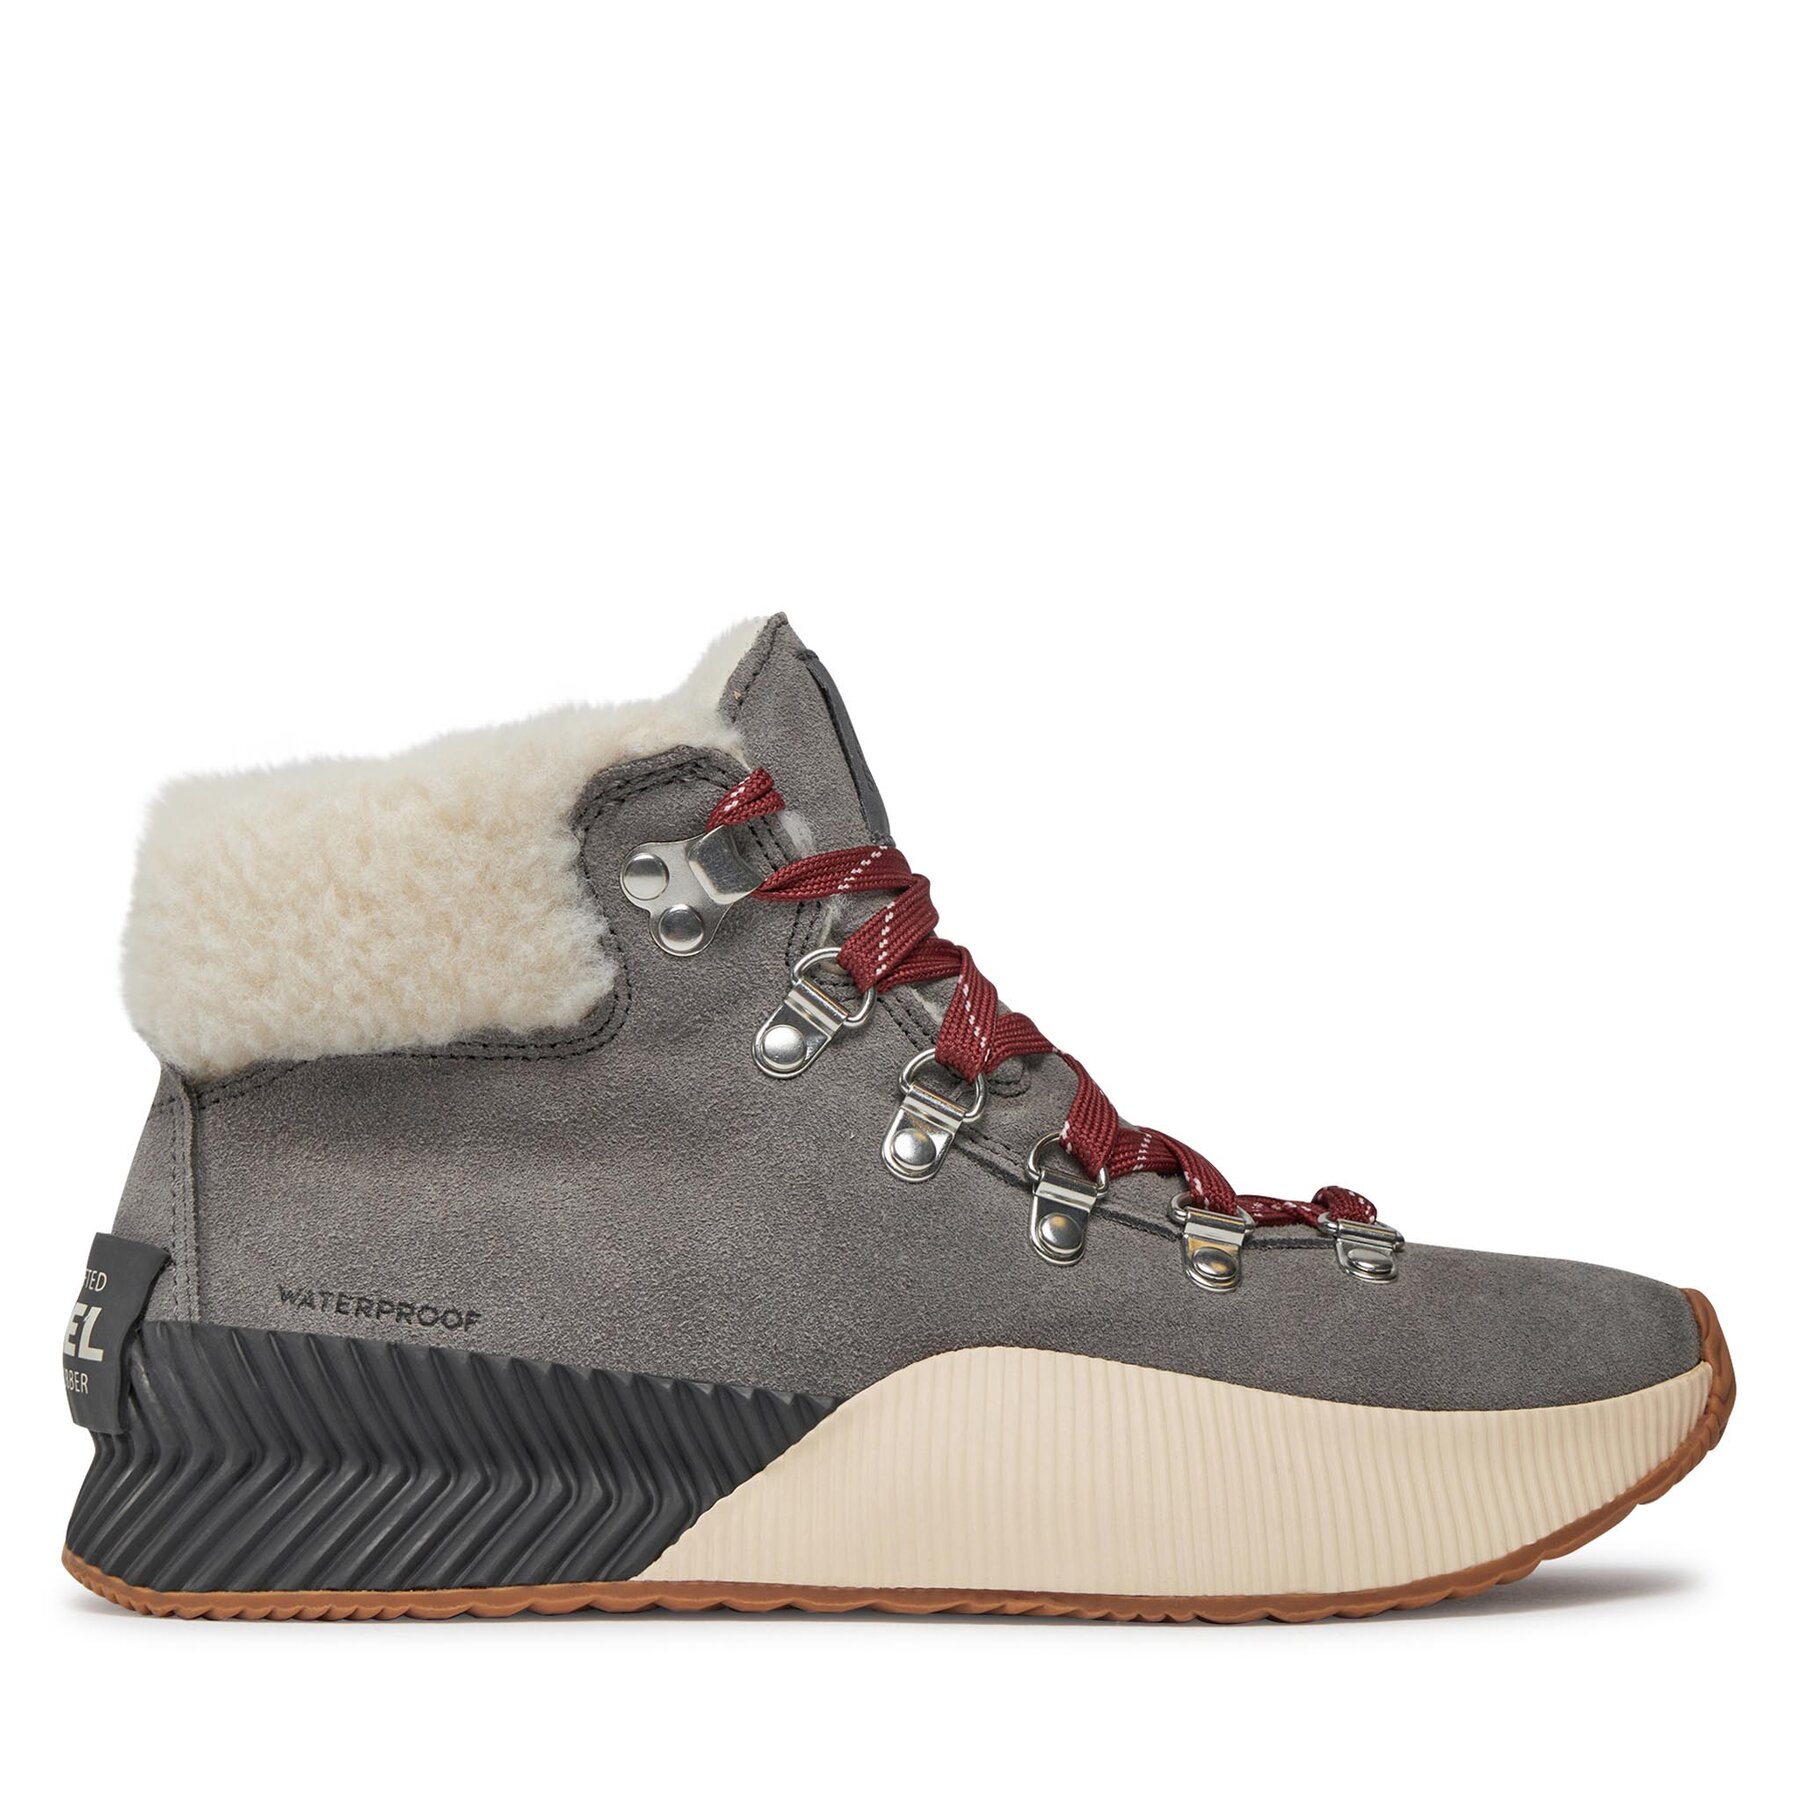 Stiefeletten Sorel Out N About™ Iii Conquest Wp NL4434-053 Quarry/Grill von Sorel